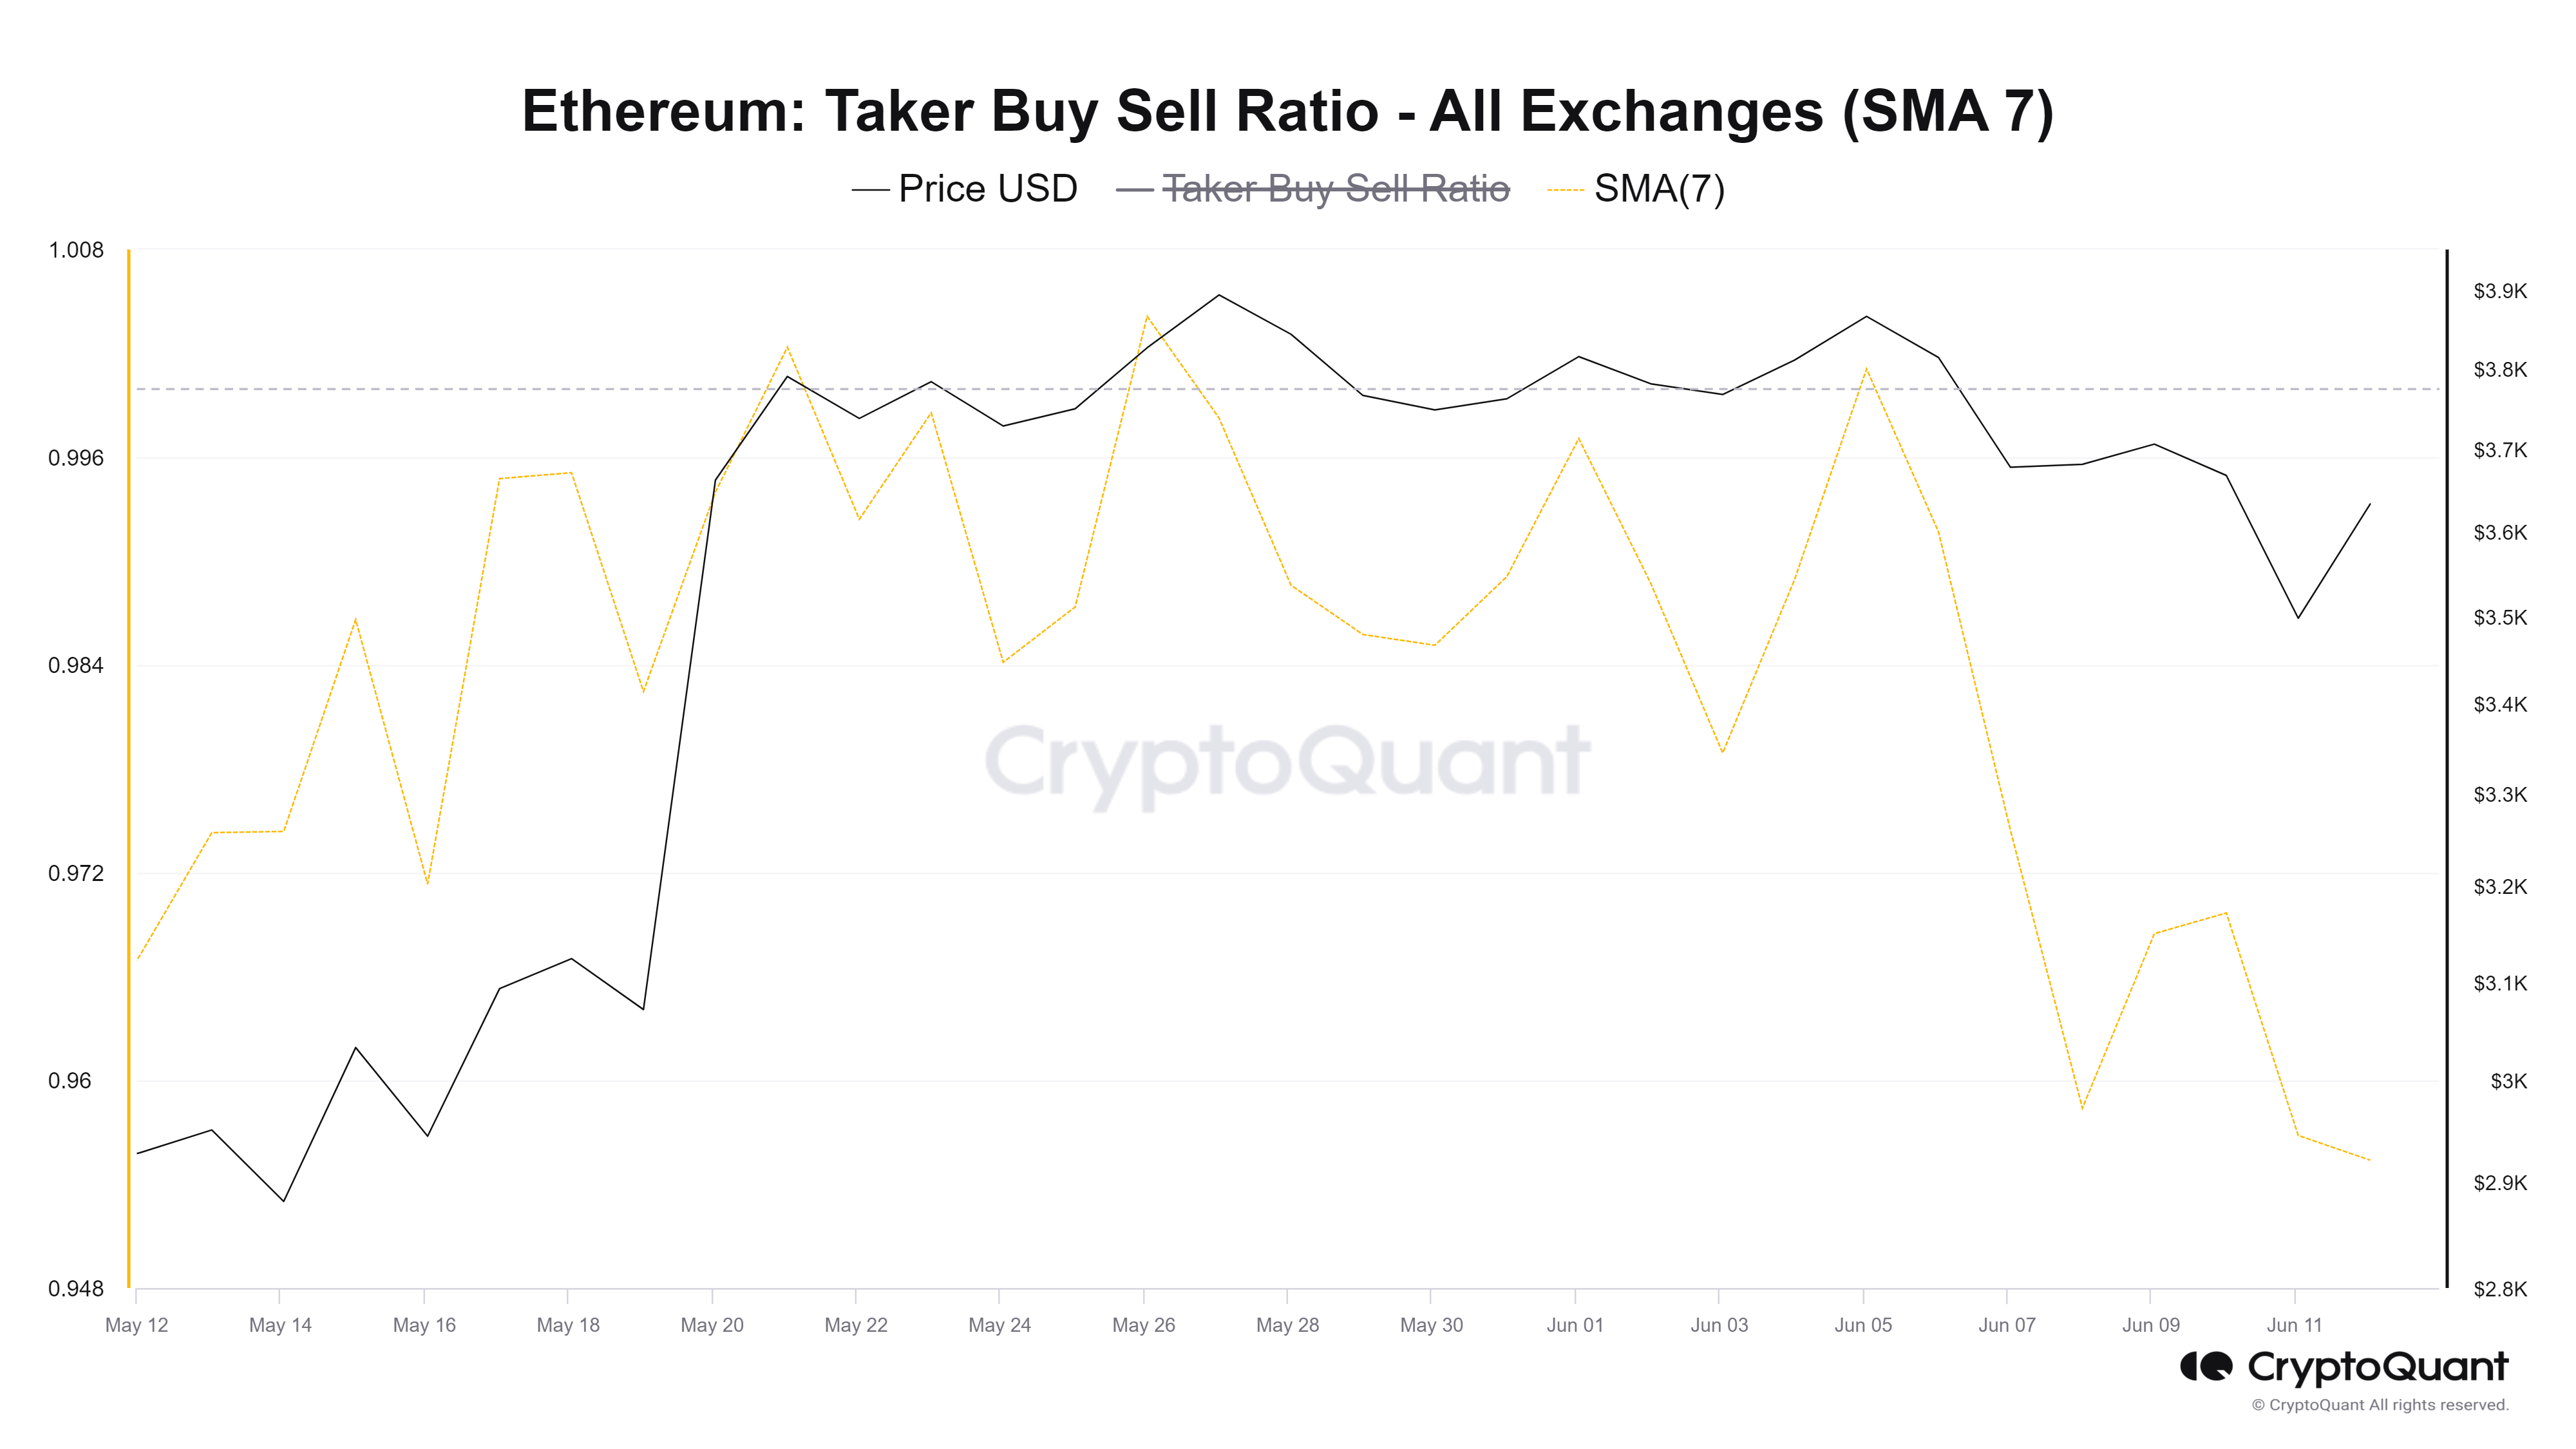 ETH Taker Buy Sell Ratio